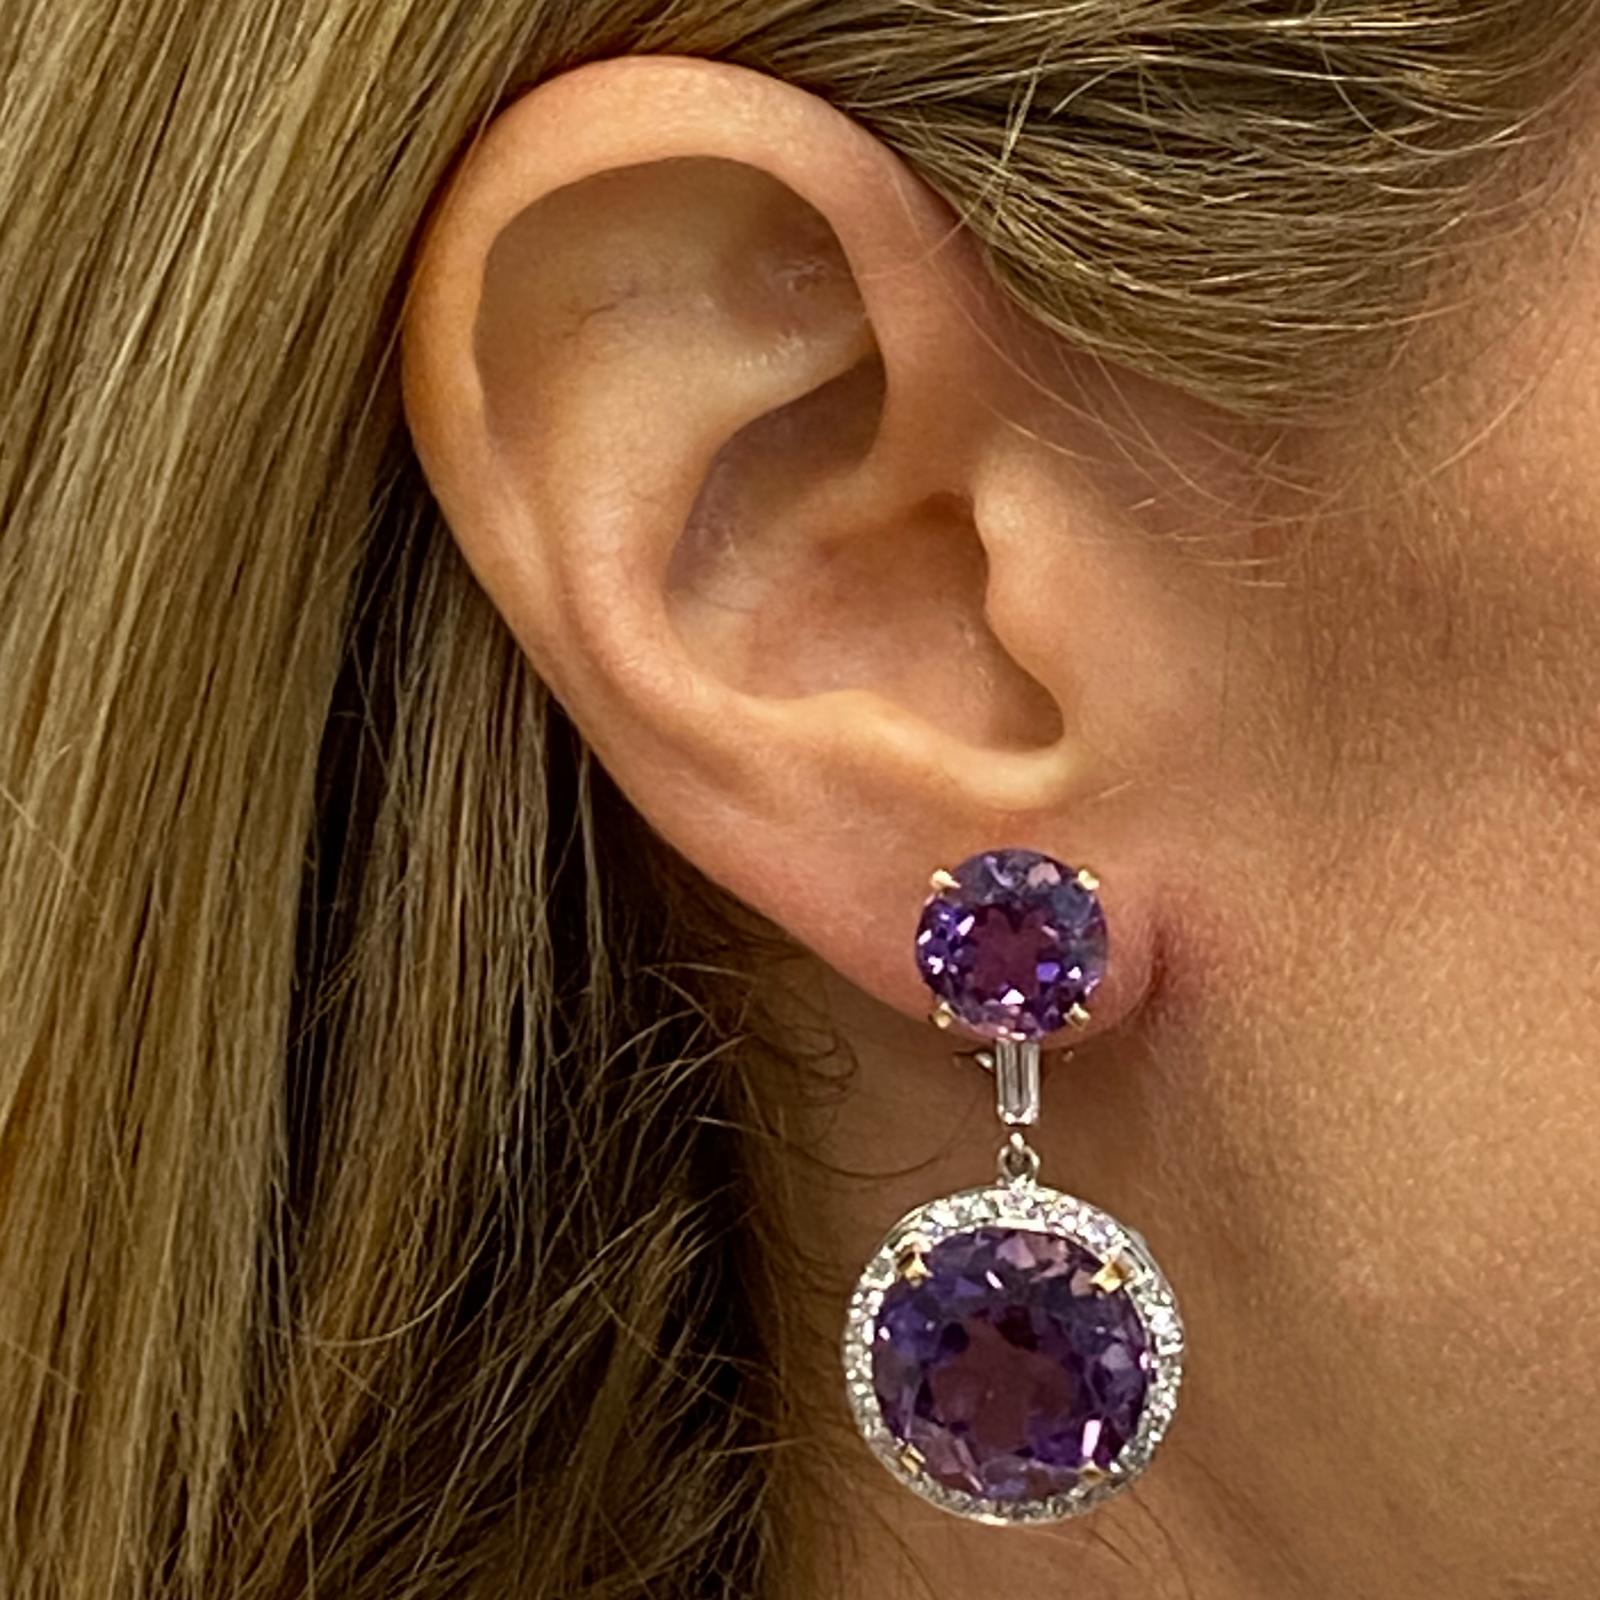 Beautifully crafted diamond and amethyst drop earrings fashioned in 14 karat white and yellow gold. The earrings feature 4 round amethyst gemstones weighing approximately 36.30 carat total weight. The bright purple gemstones are accented with